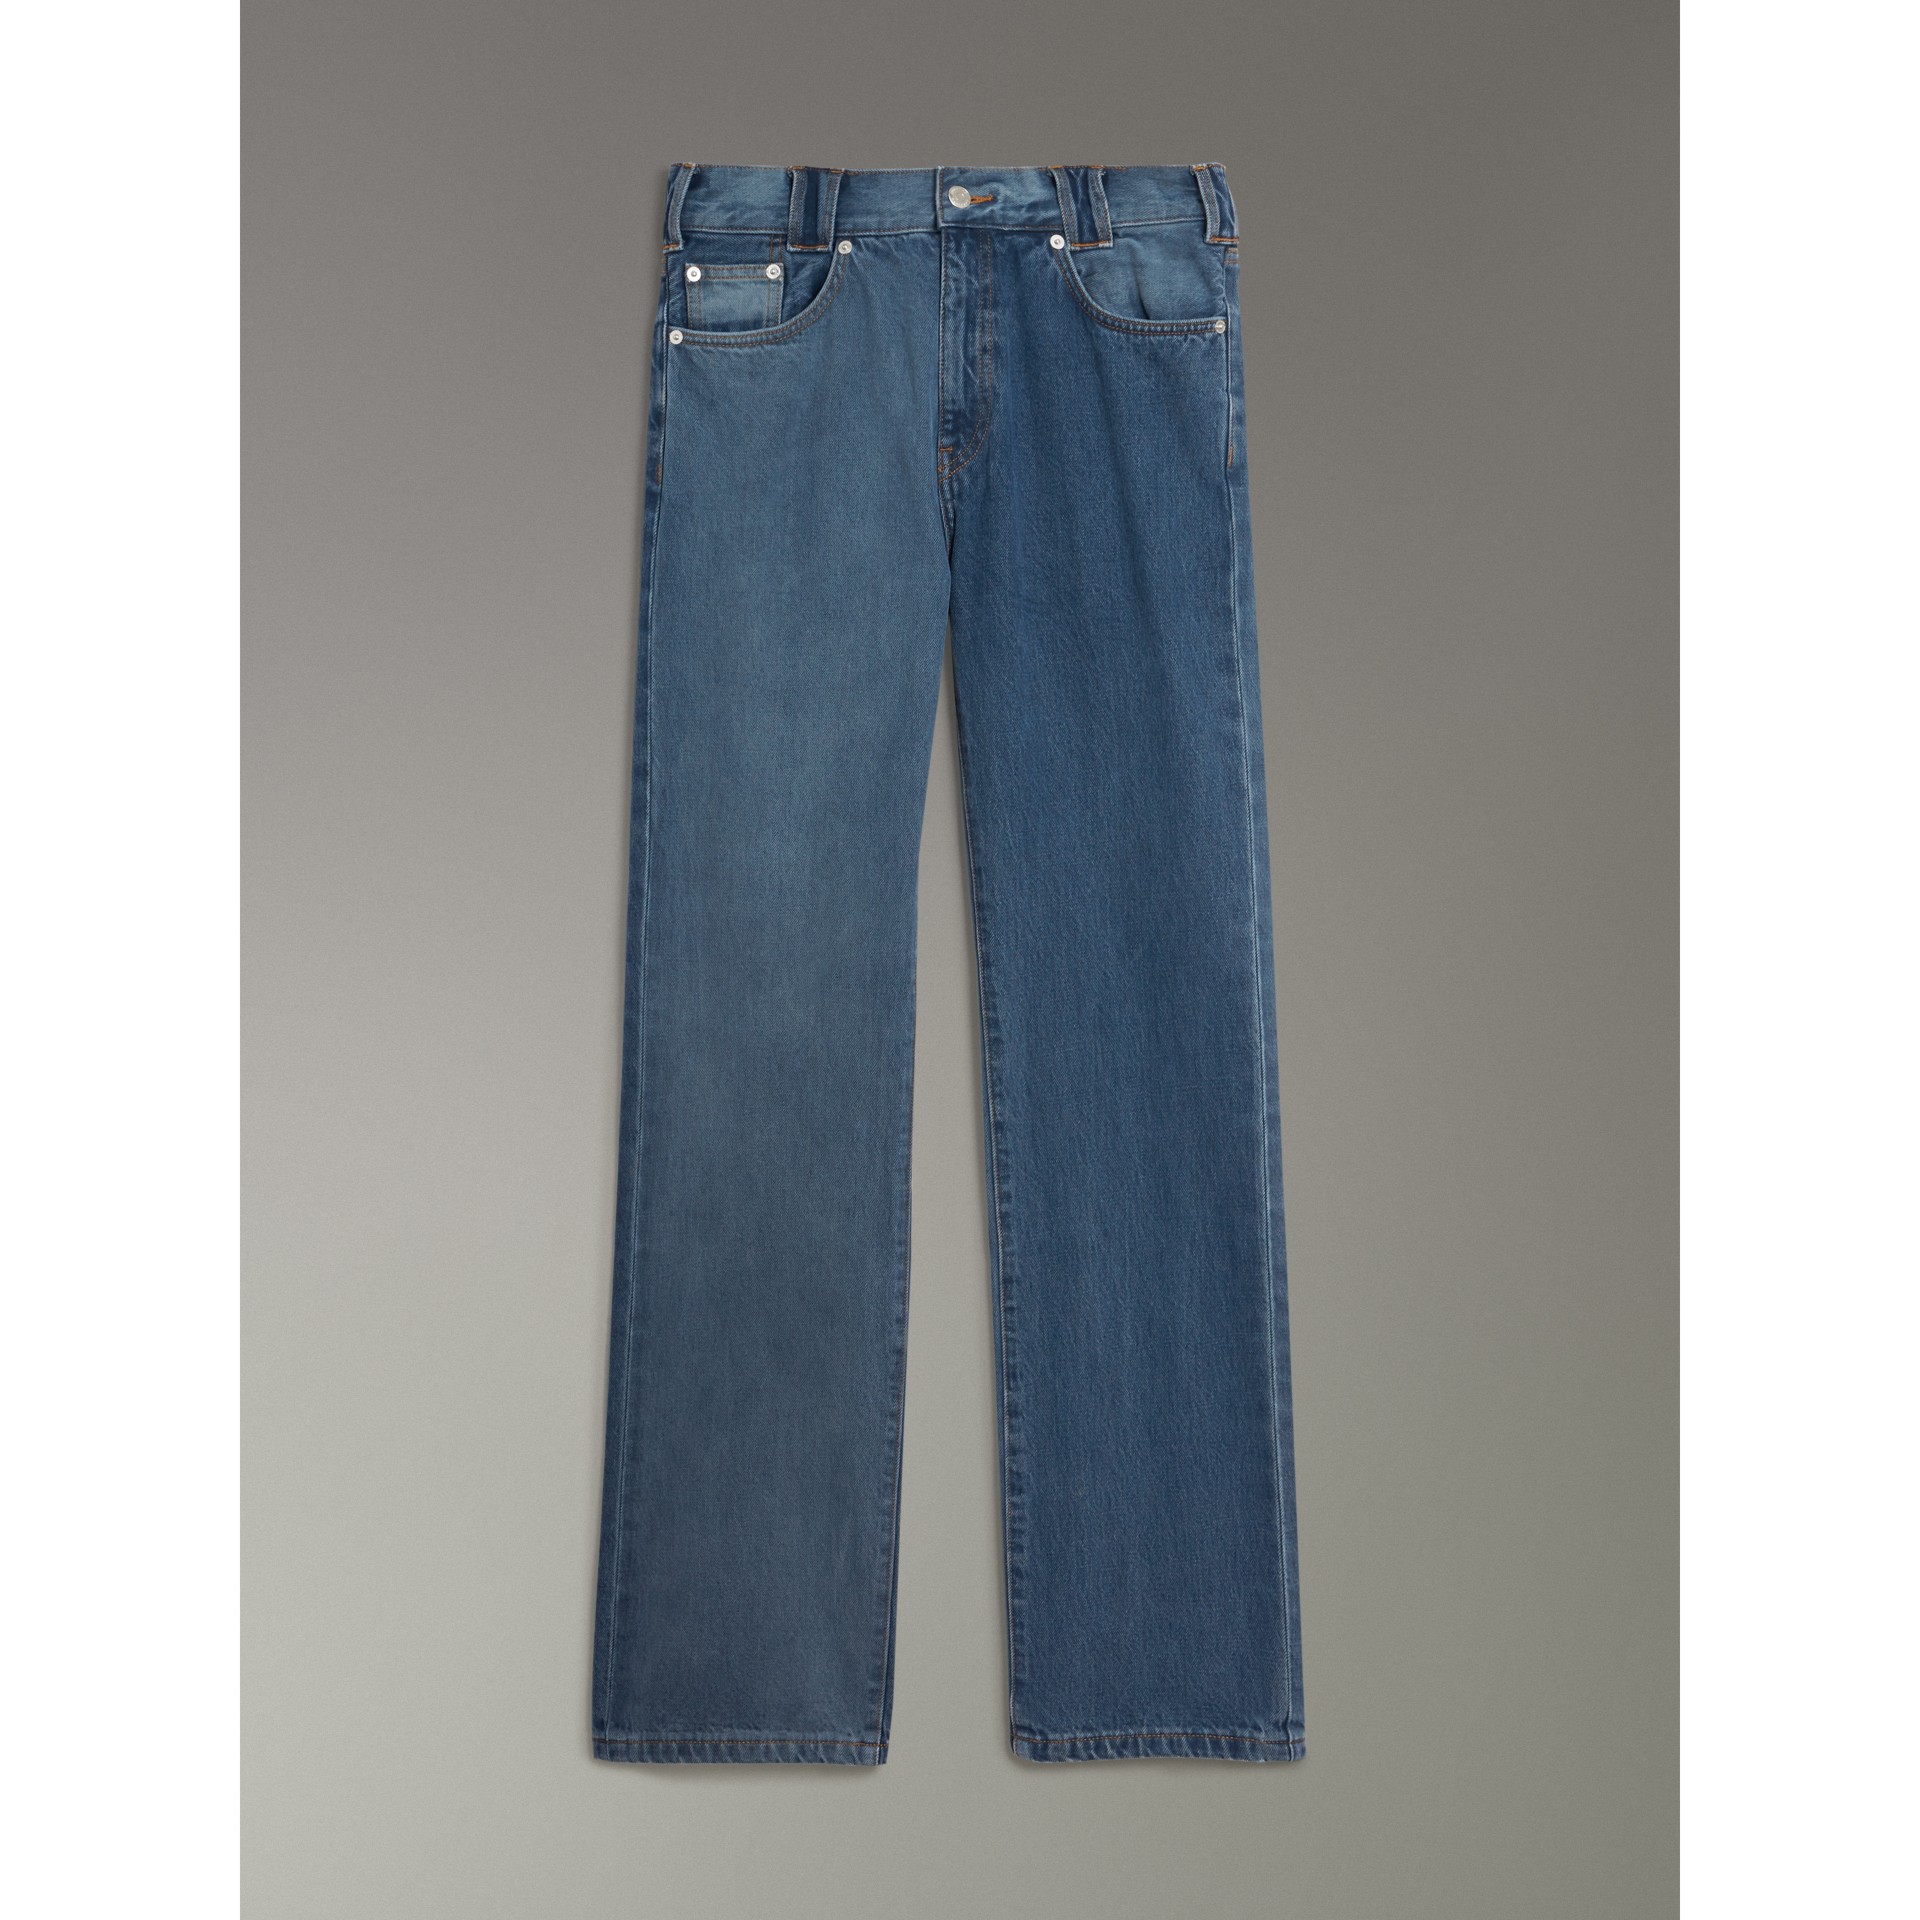 Straight Fit Two-tone Jeans in Indigo - Men | Burberry United States